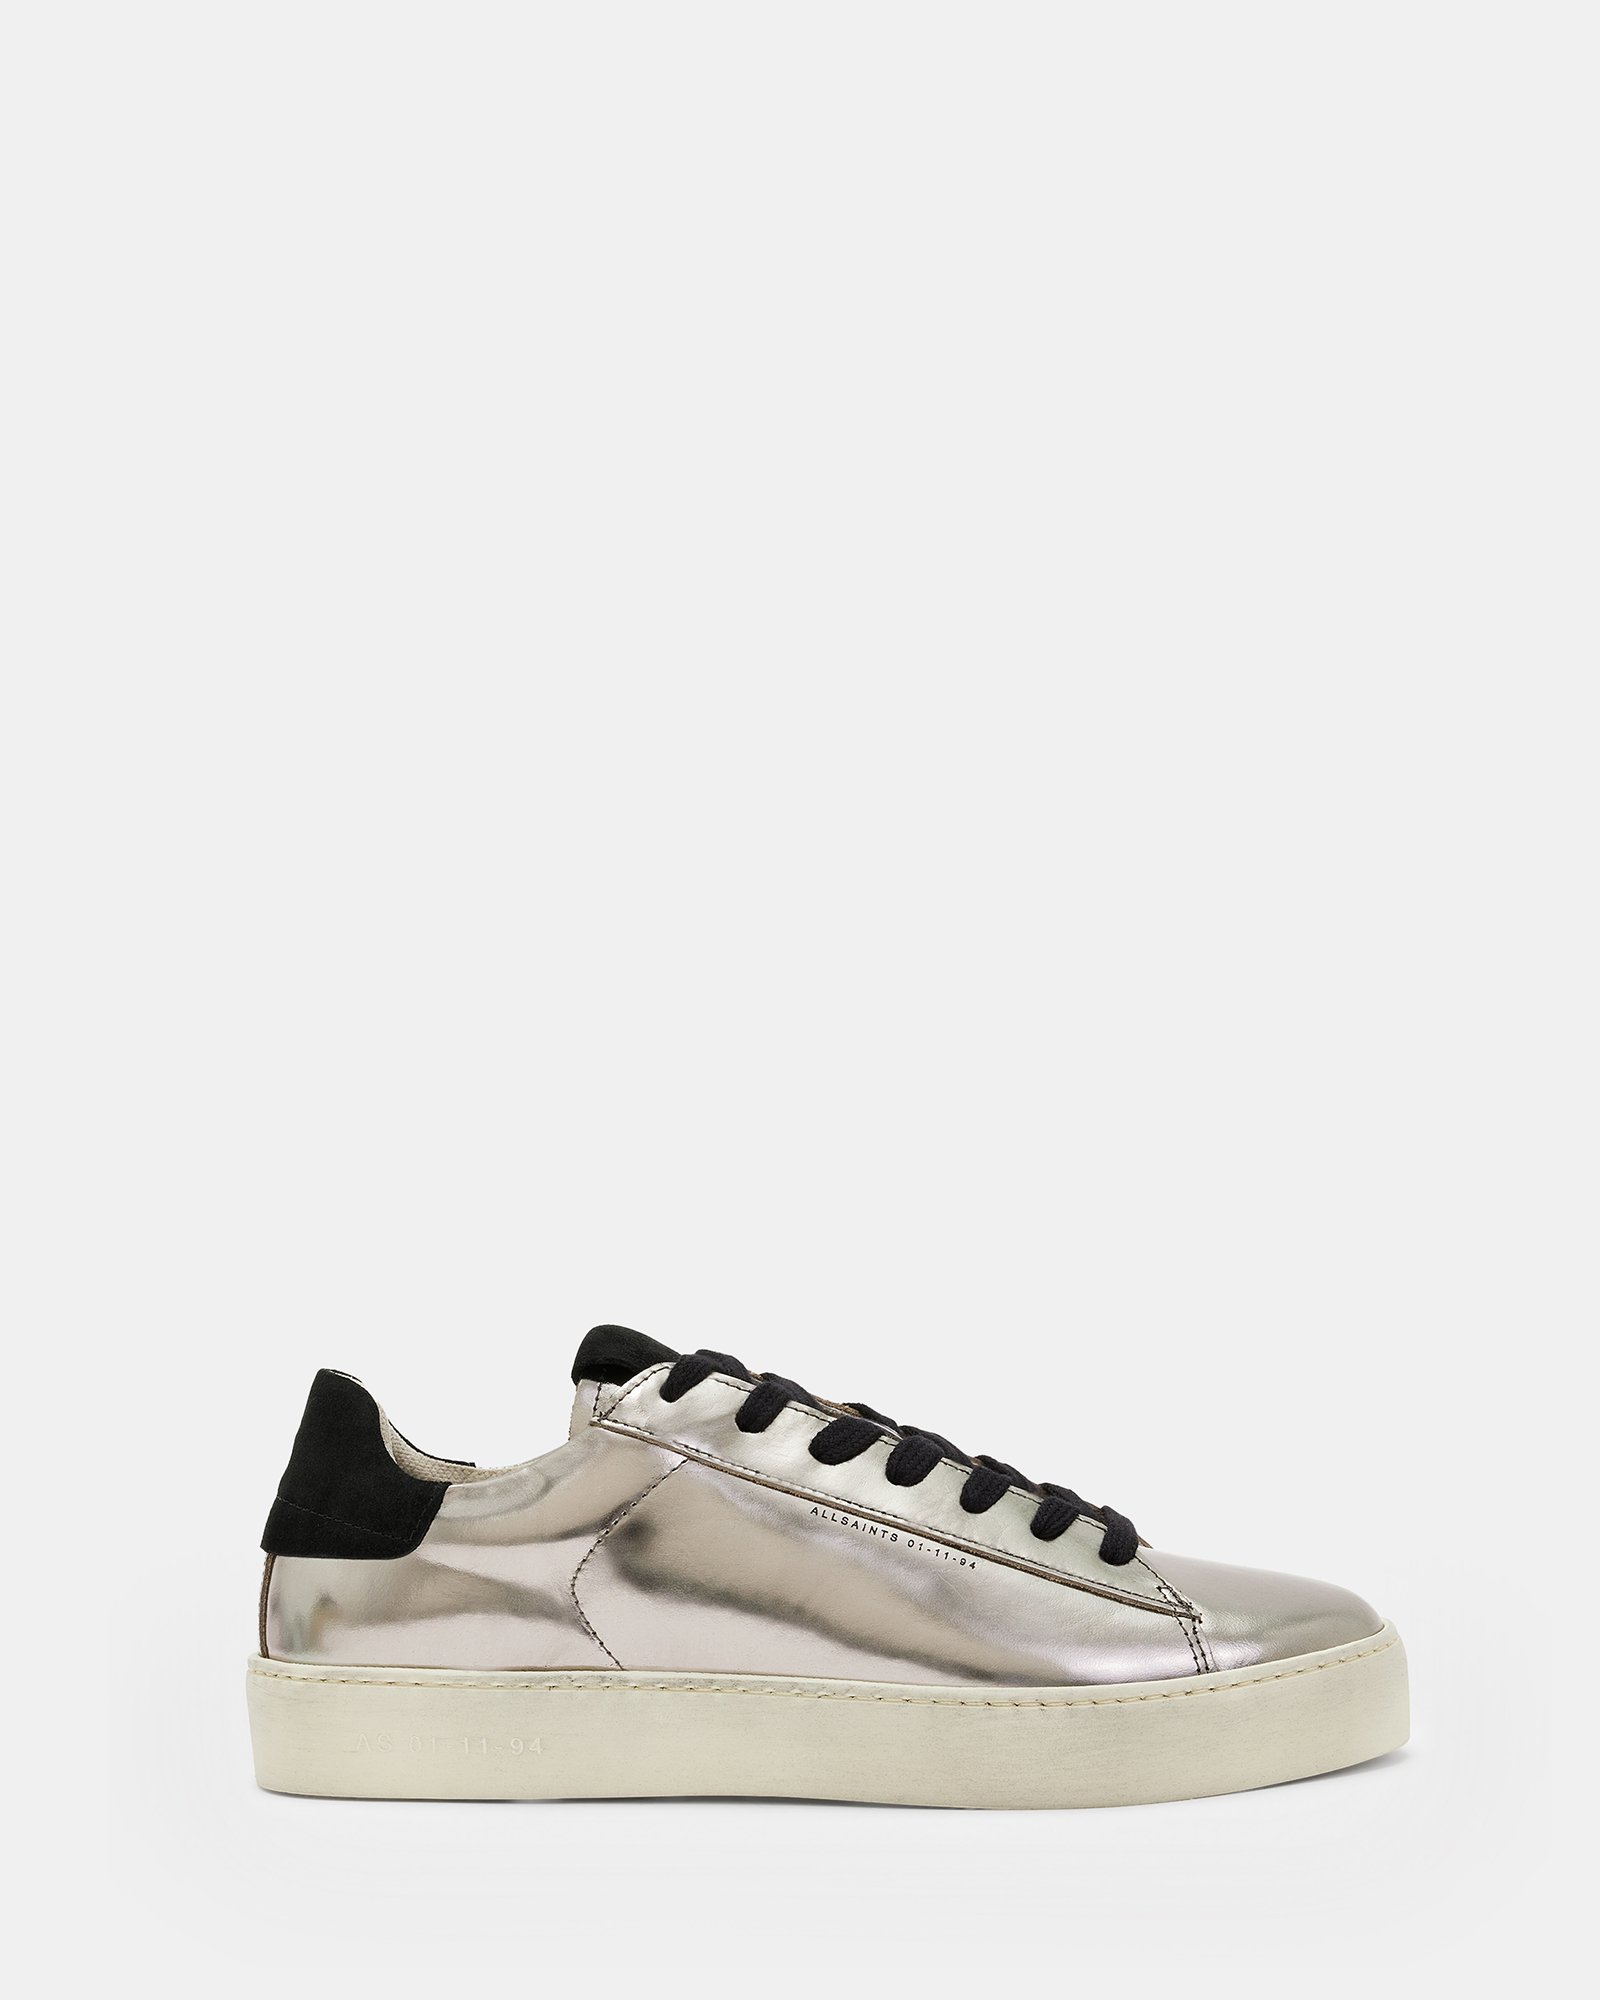 Sheer Metallic Leather Sneakers Silver/Gold